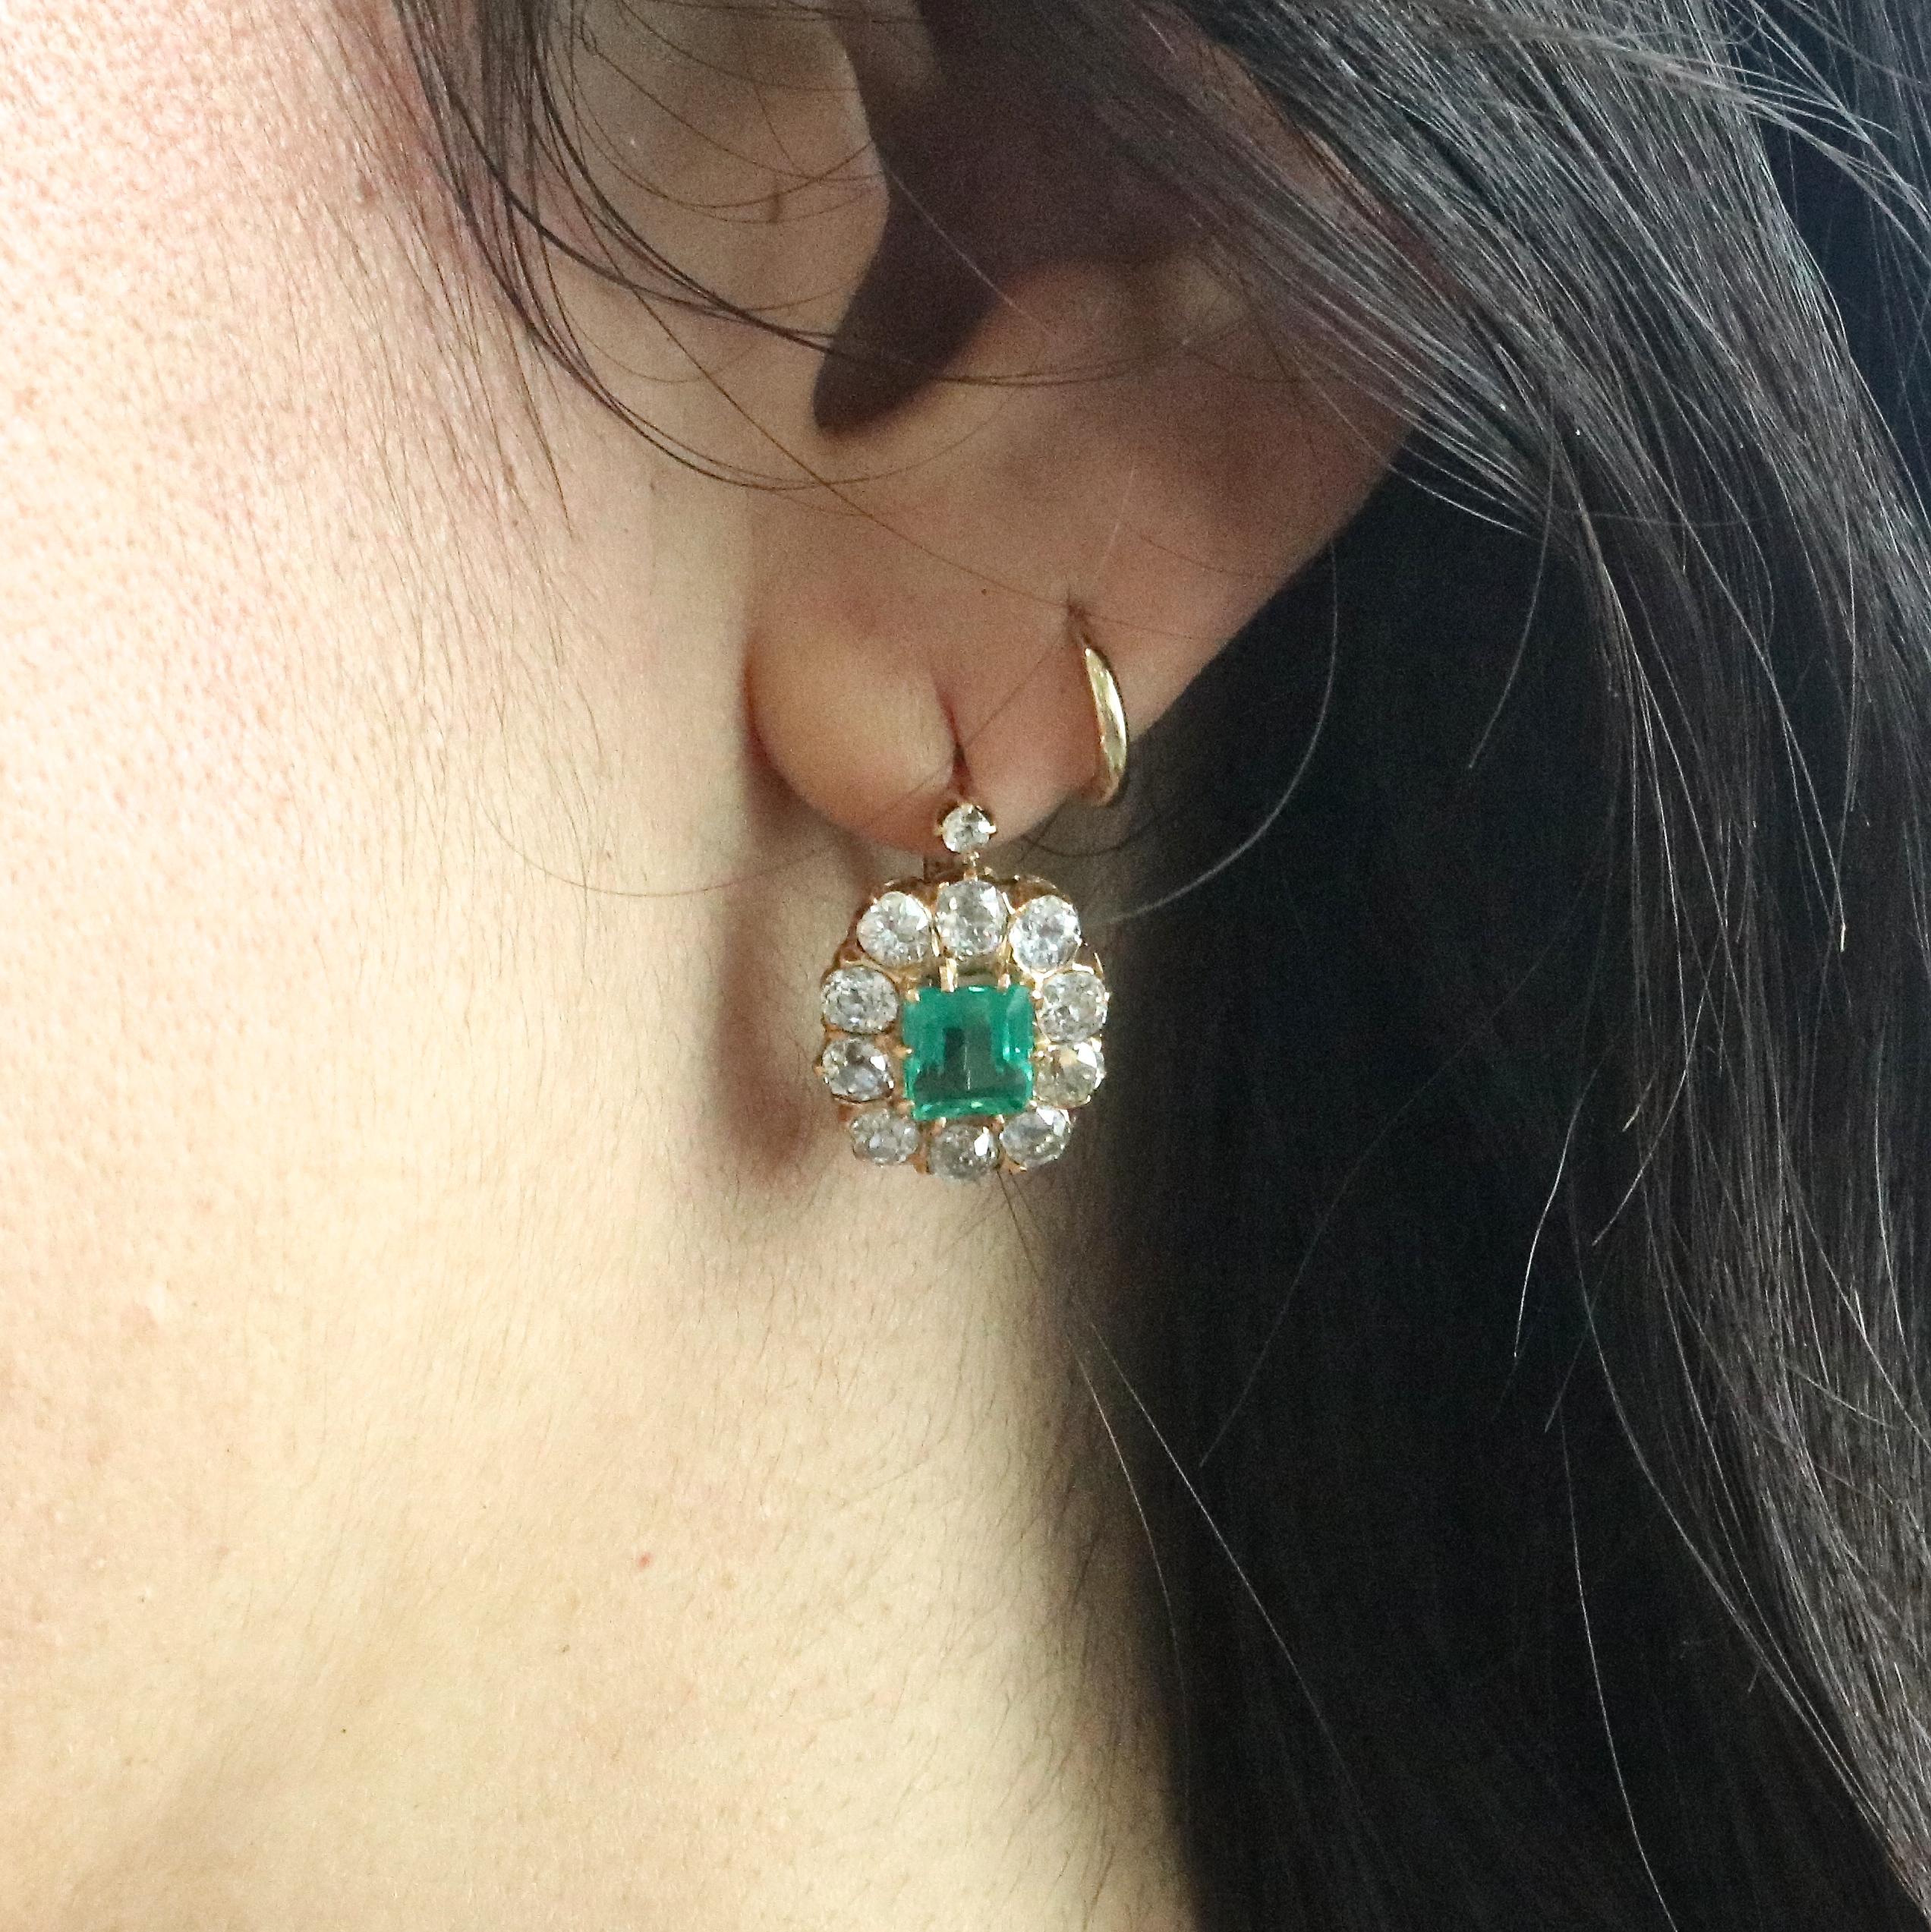 Classic Victorian earrings that are still so good looking after all these years. A great addition to your earring collection. The lively emeralds weigh approximately 2.10 carats, surrounded by 22 old European cut diamonds  weighing approximately